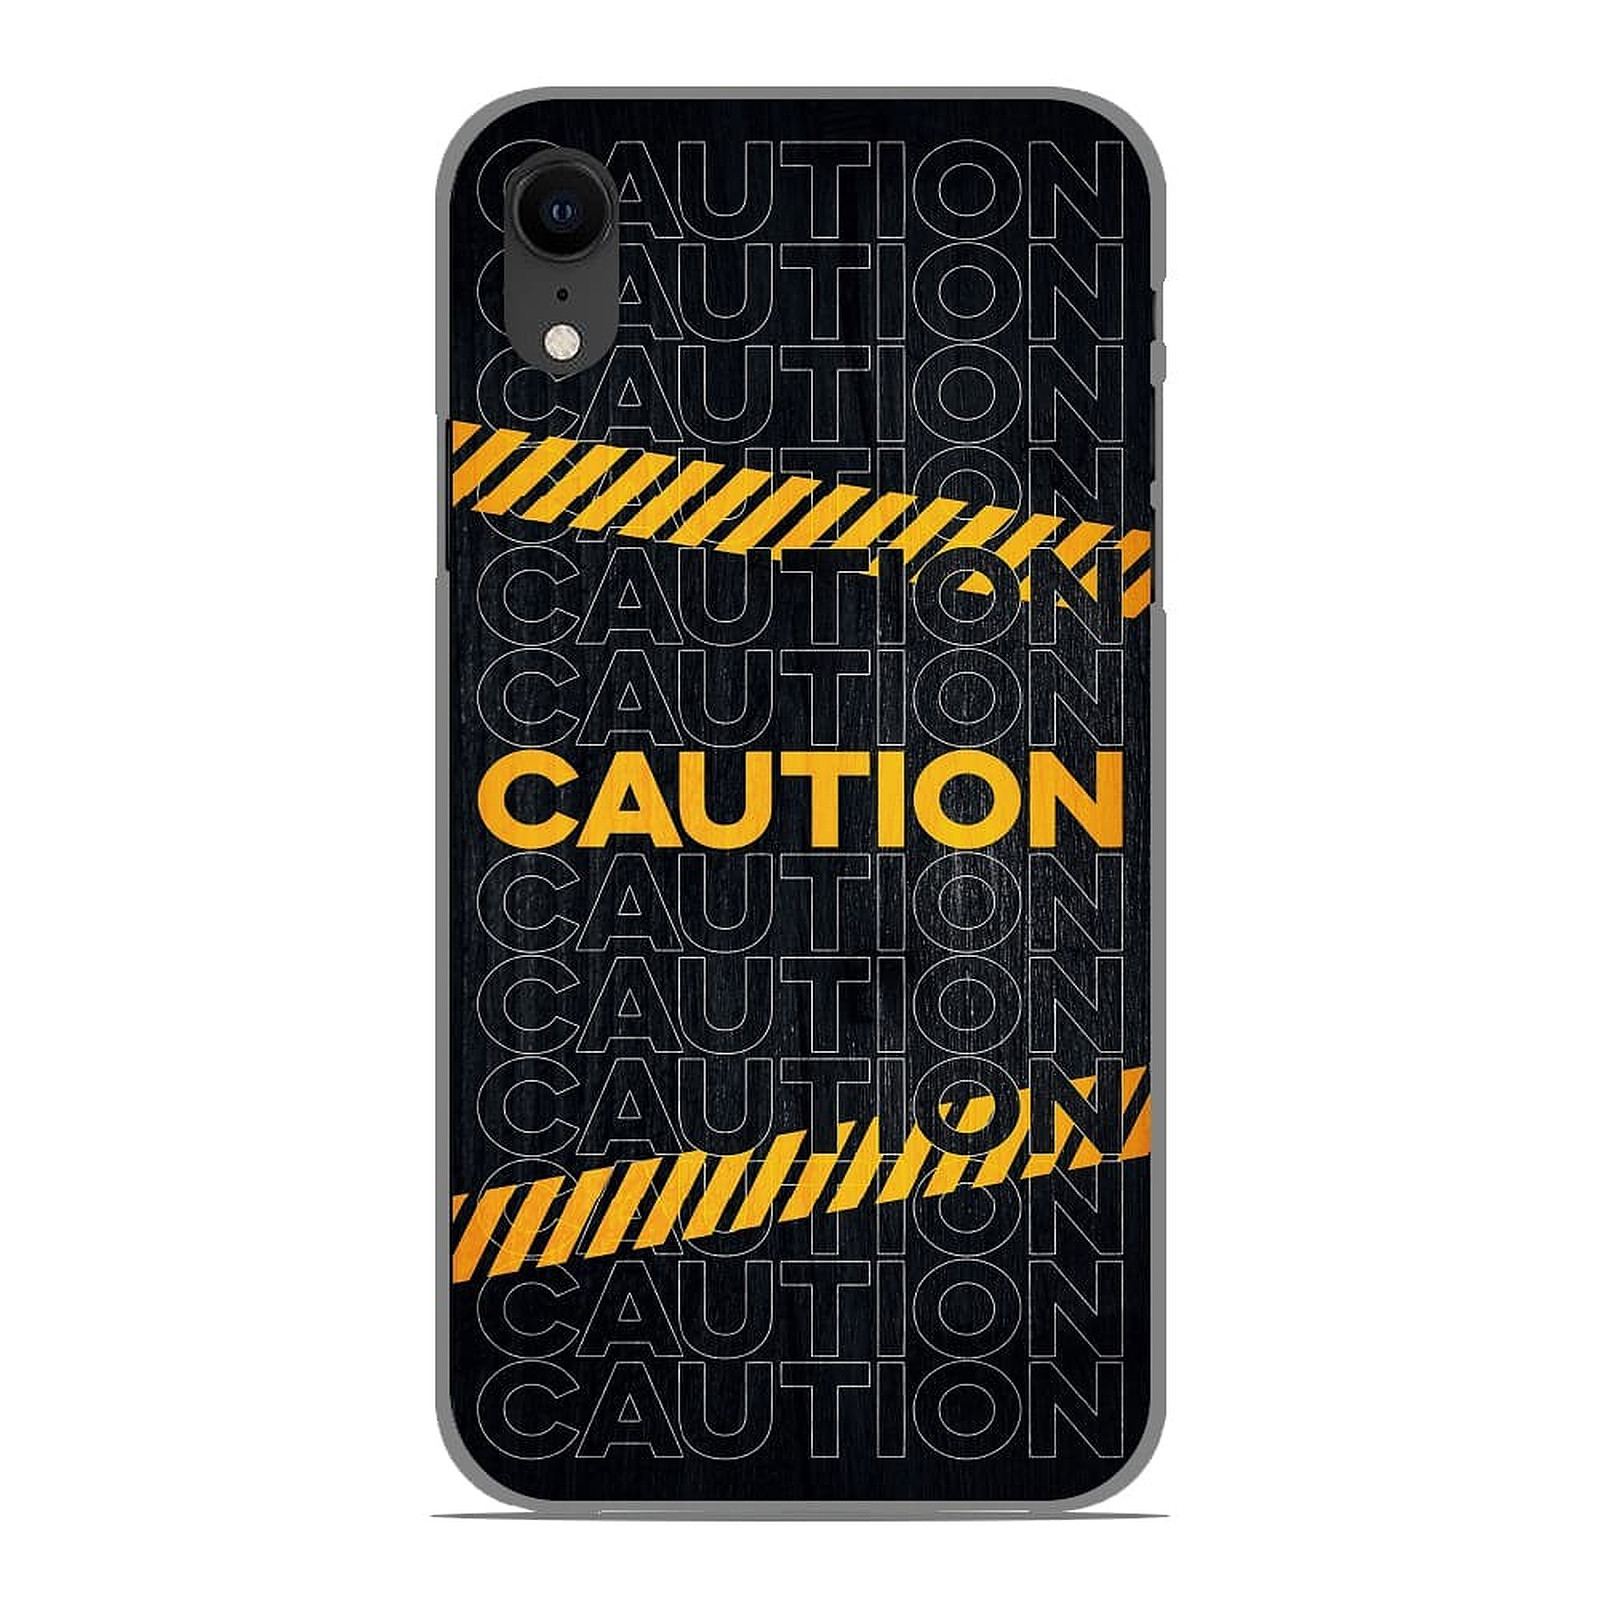 1001 Coques Coque silicone gel Apple iPhone XR motif Caution - Coque telephone 1001Coques